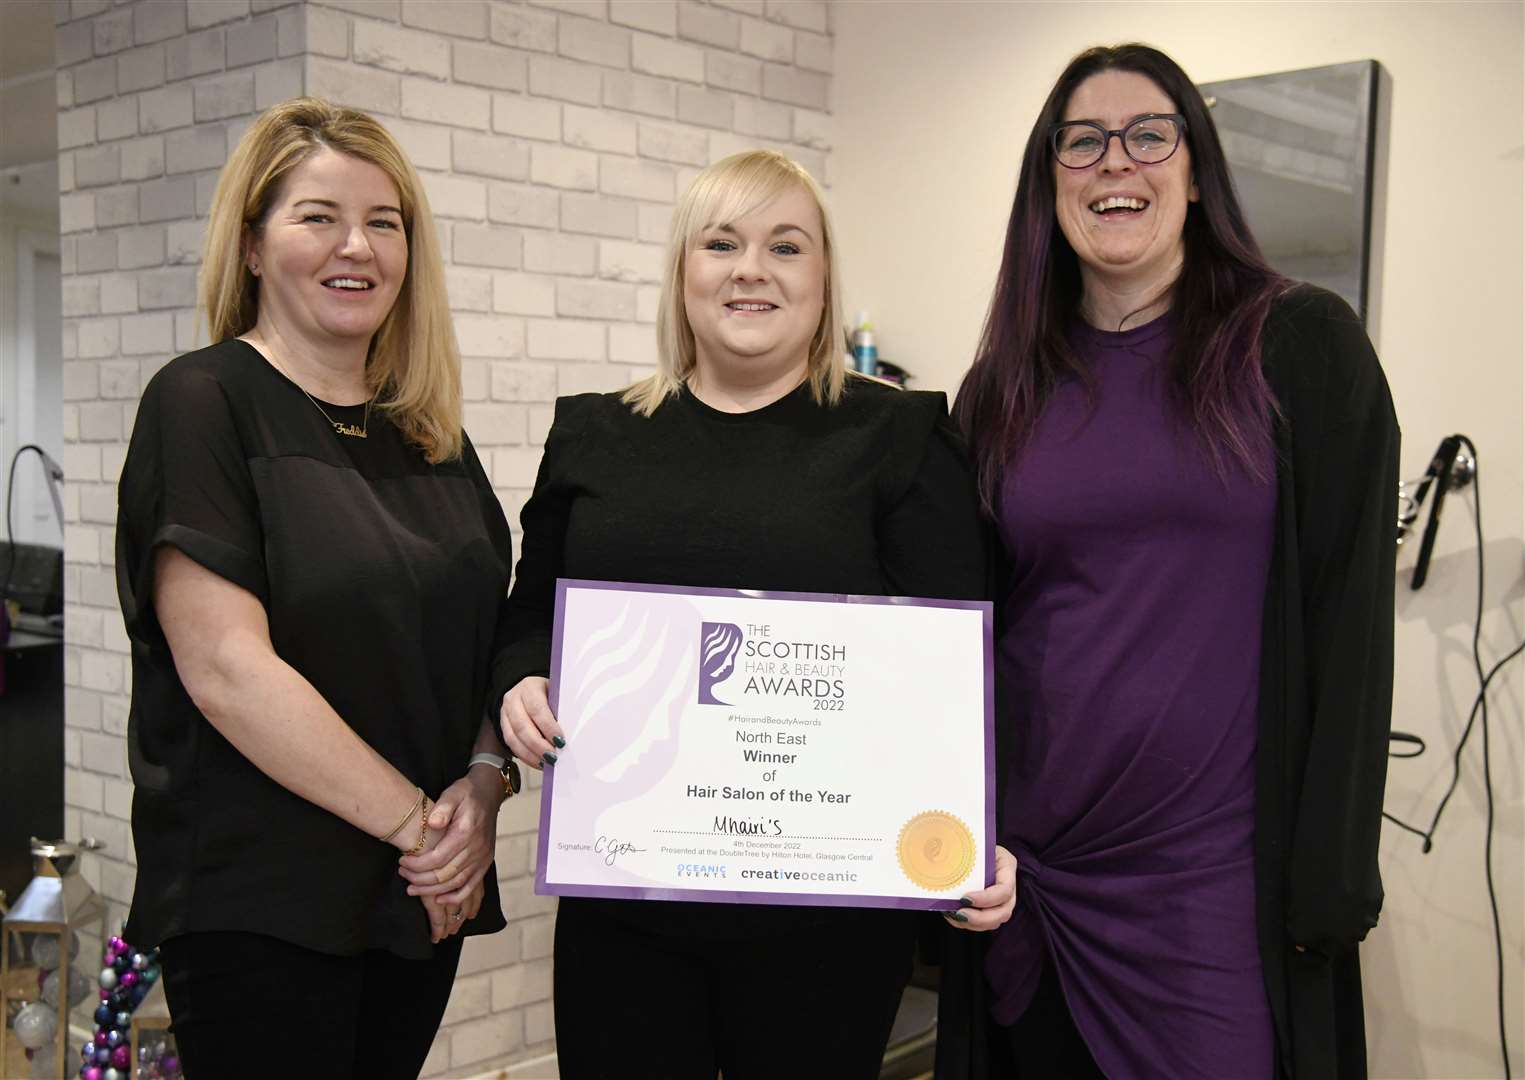 Portsoy hairdressers Mhairi's named as north-east Hair Salon of the Year at  The Scottish Hair and Beauty Awards